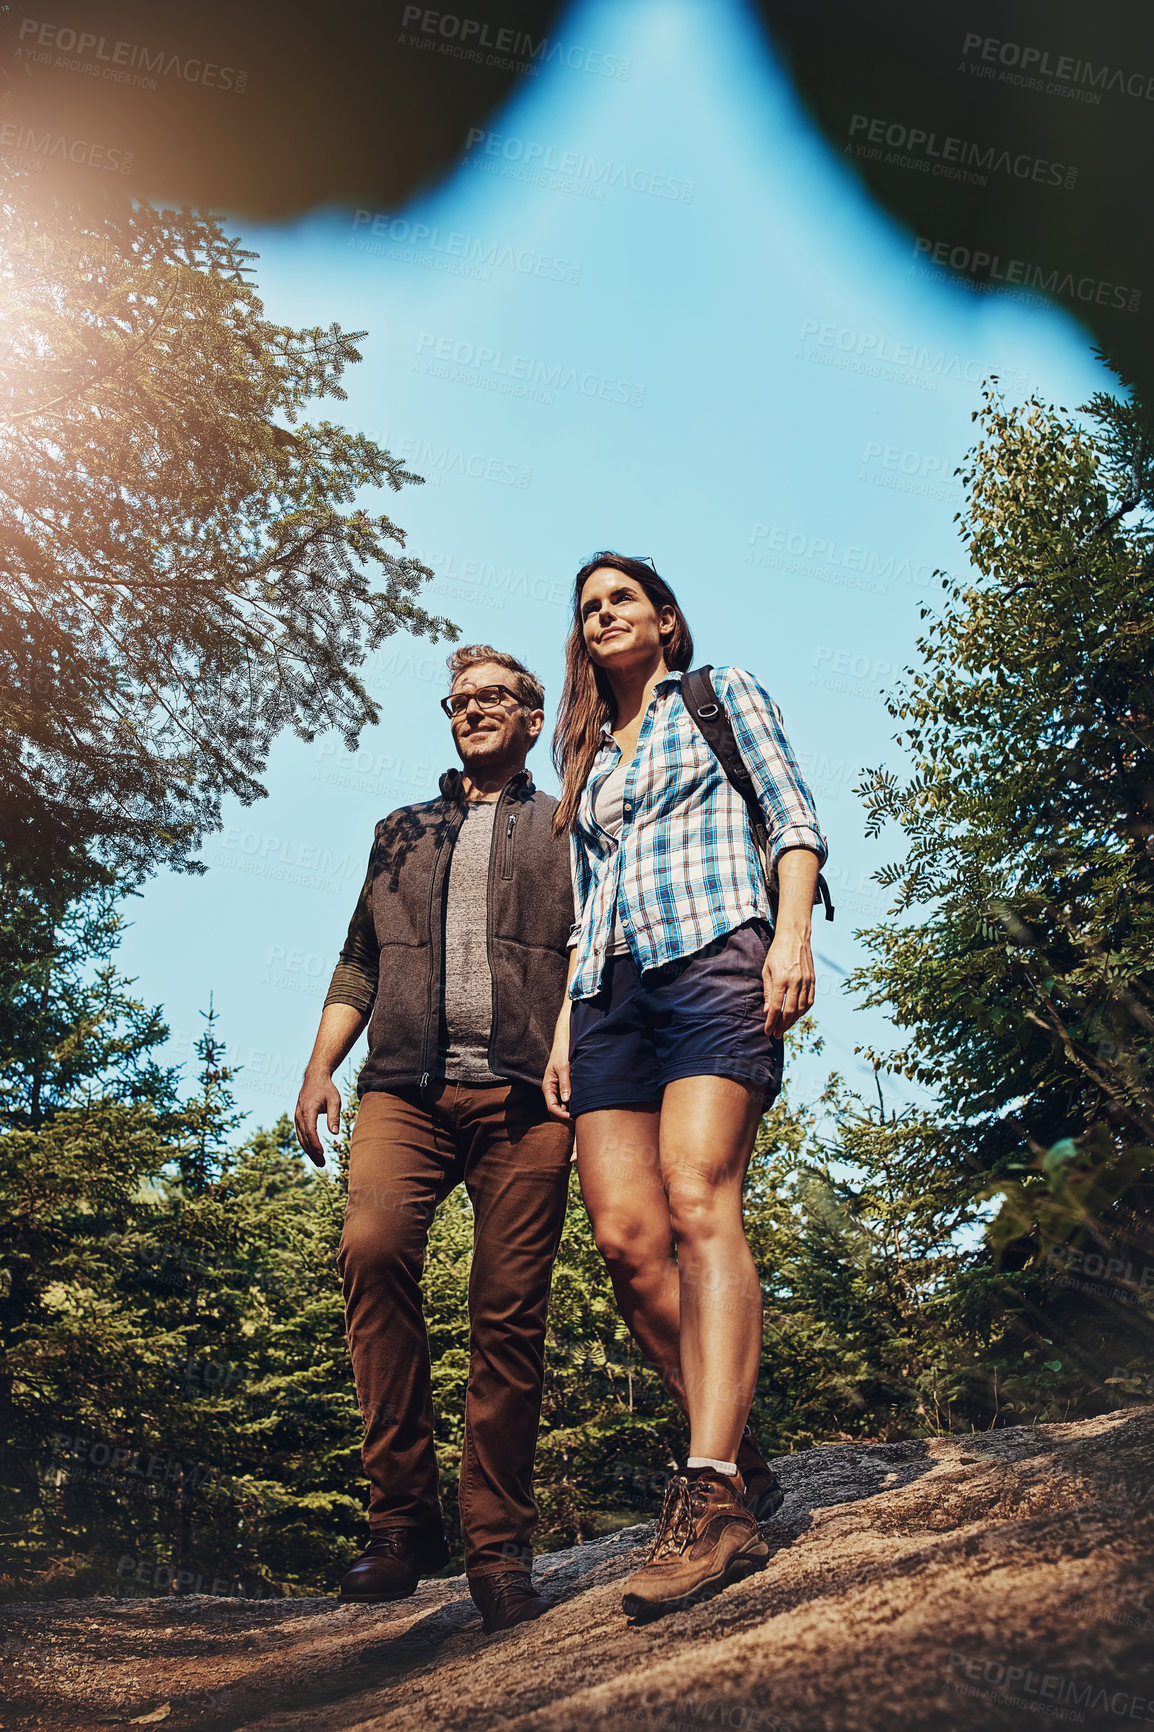 Buy stock photo Shot of a young couple going for a hike through nature